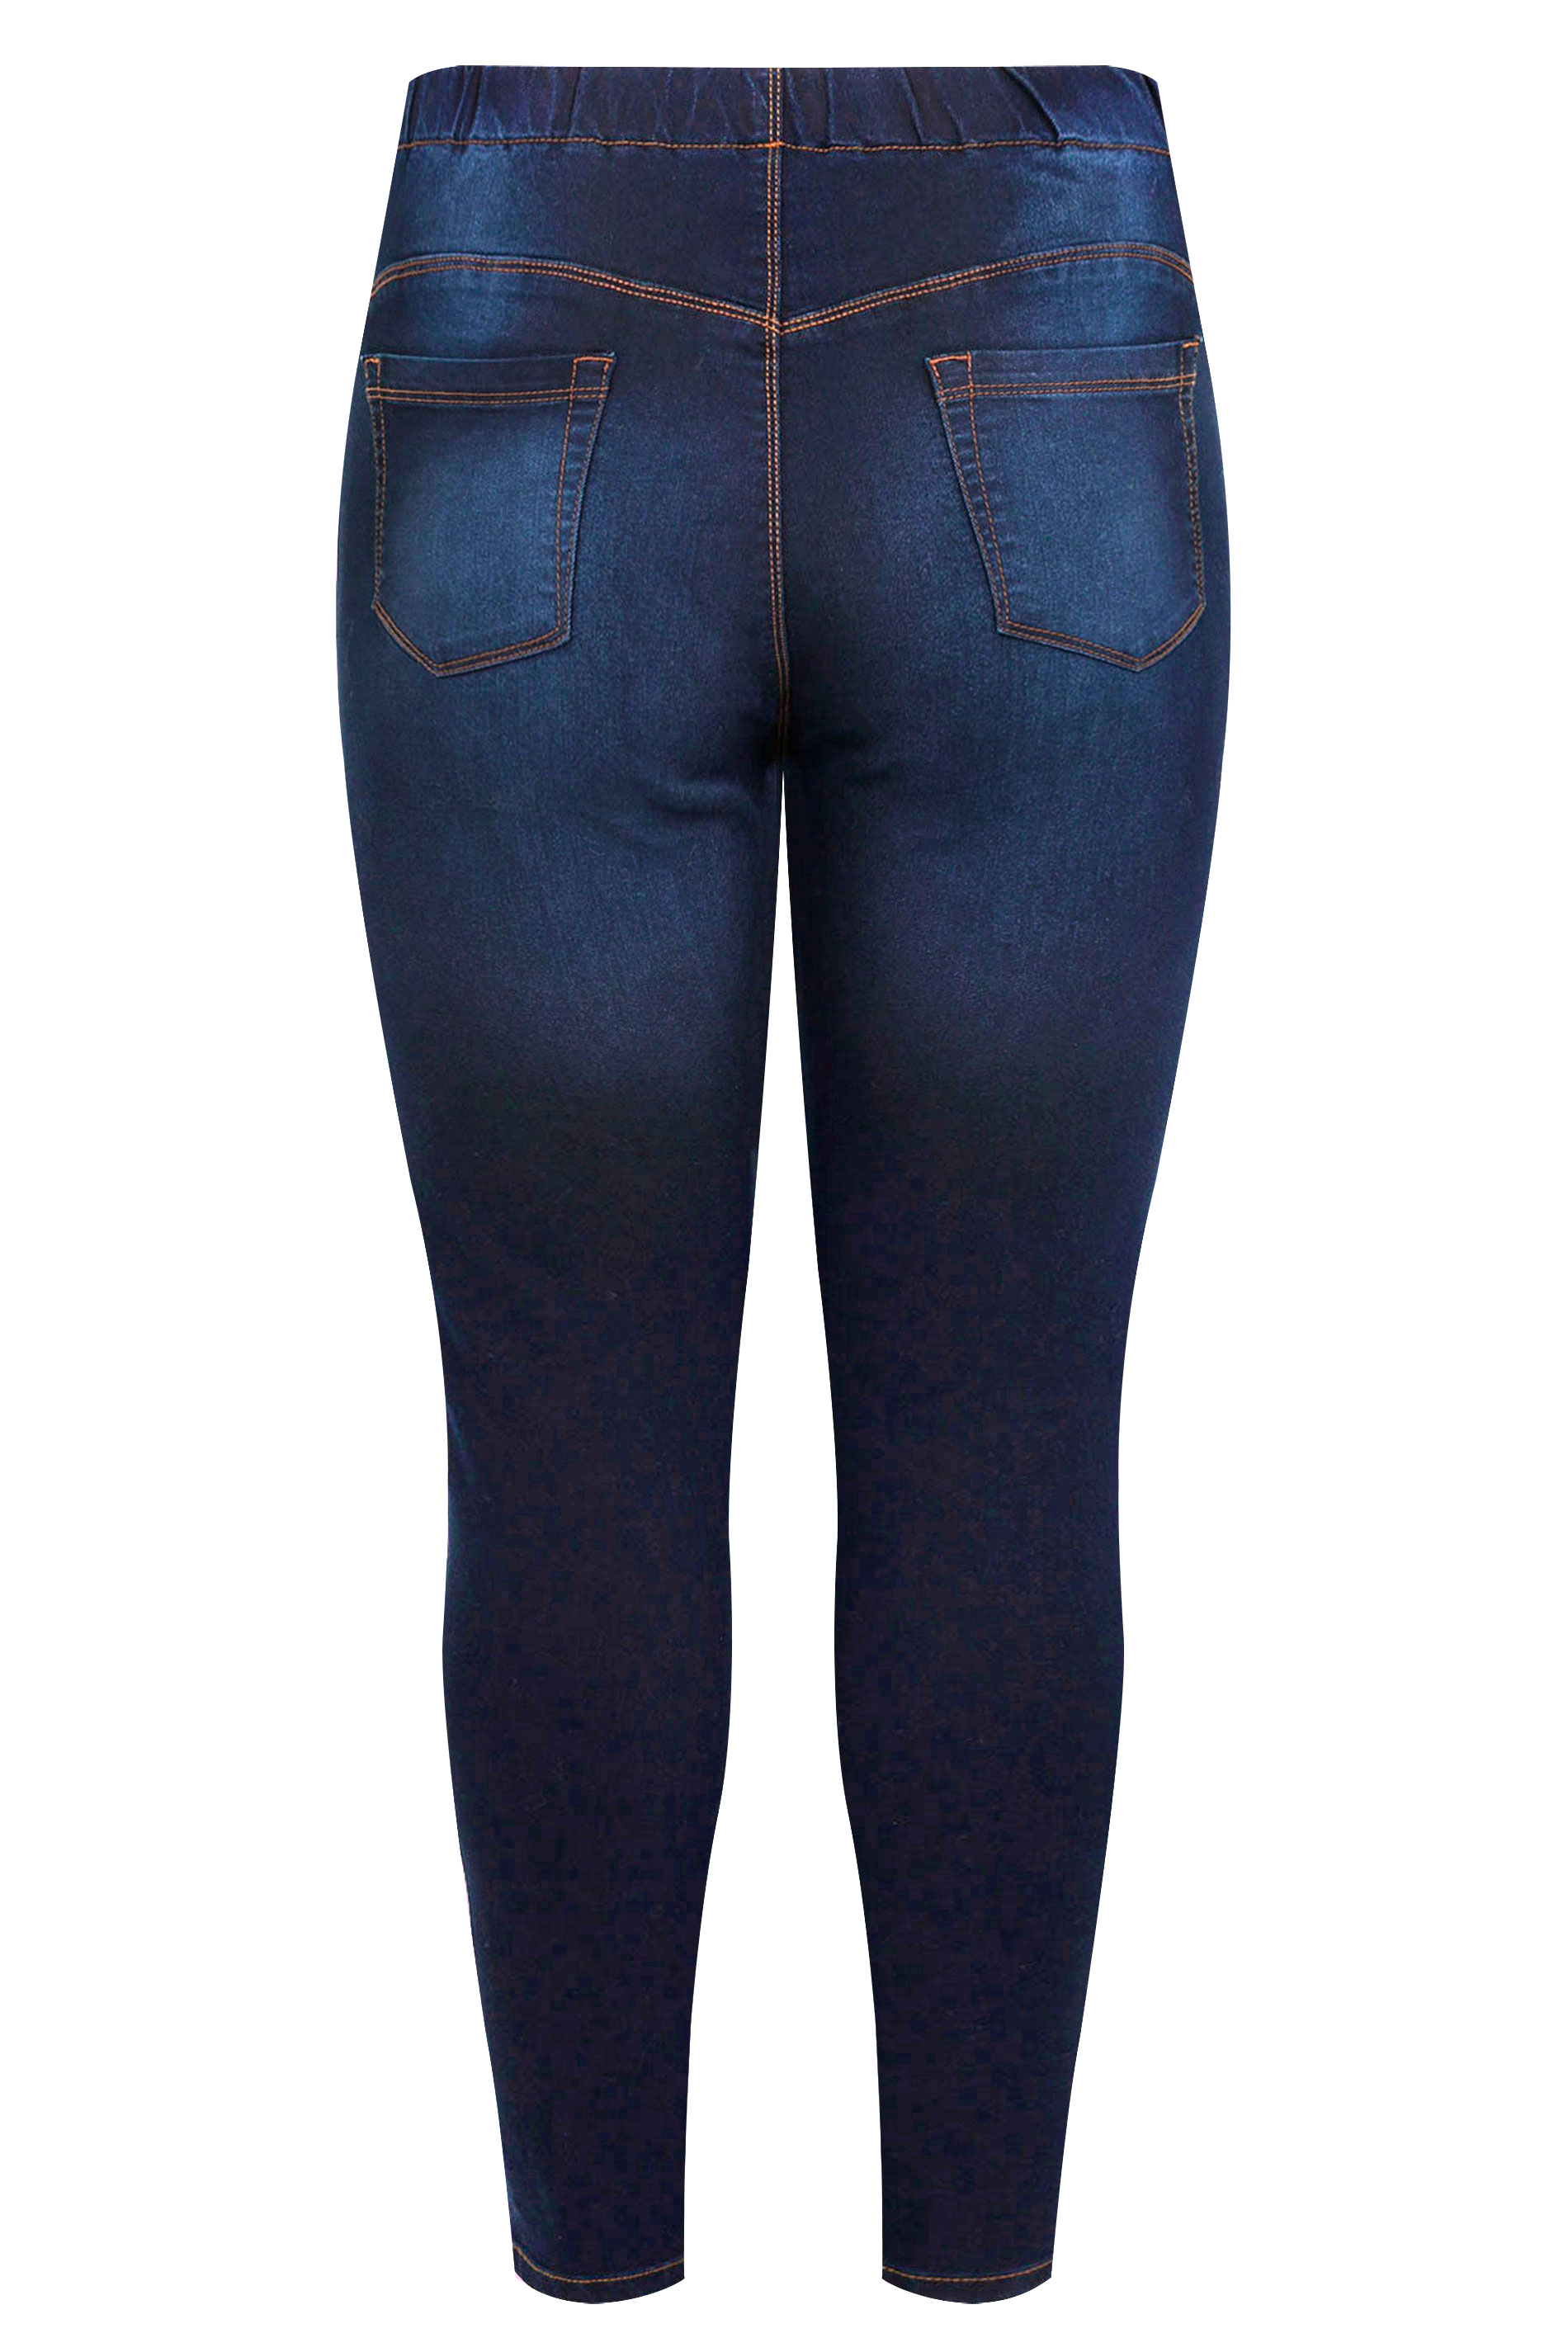 SO Solid Blue Jeggings Size 11 - 45% off